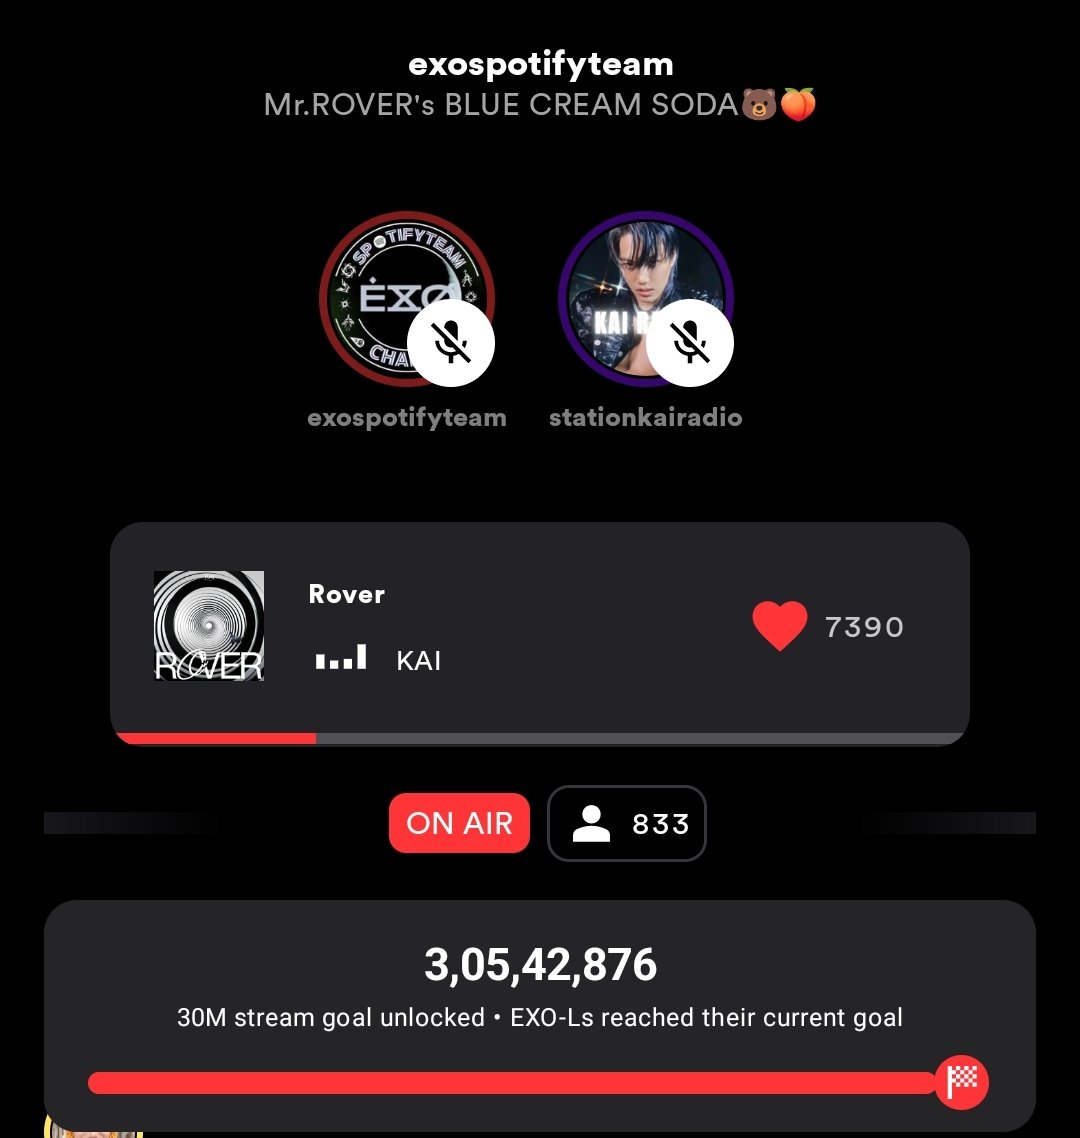 The #Rover100MParty is now ON AIR with @EXOspotifyTeam Please keep joining and get Rover to 100M soon 💛 let's get to 1K listeners today. 🔗: stationhead.com/exospotifyteam We need to break records with Rover, so all we need is your support, so pls join #KAI #KAI_Rover @weareoneEXO